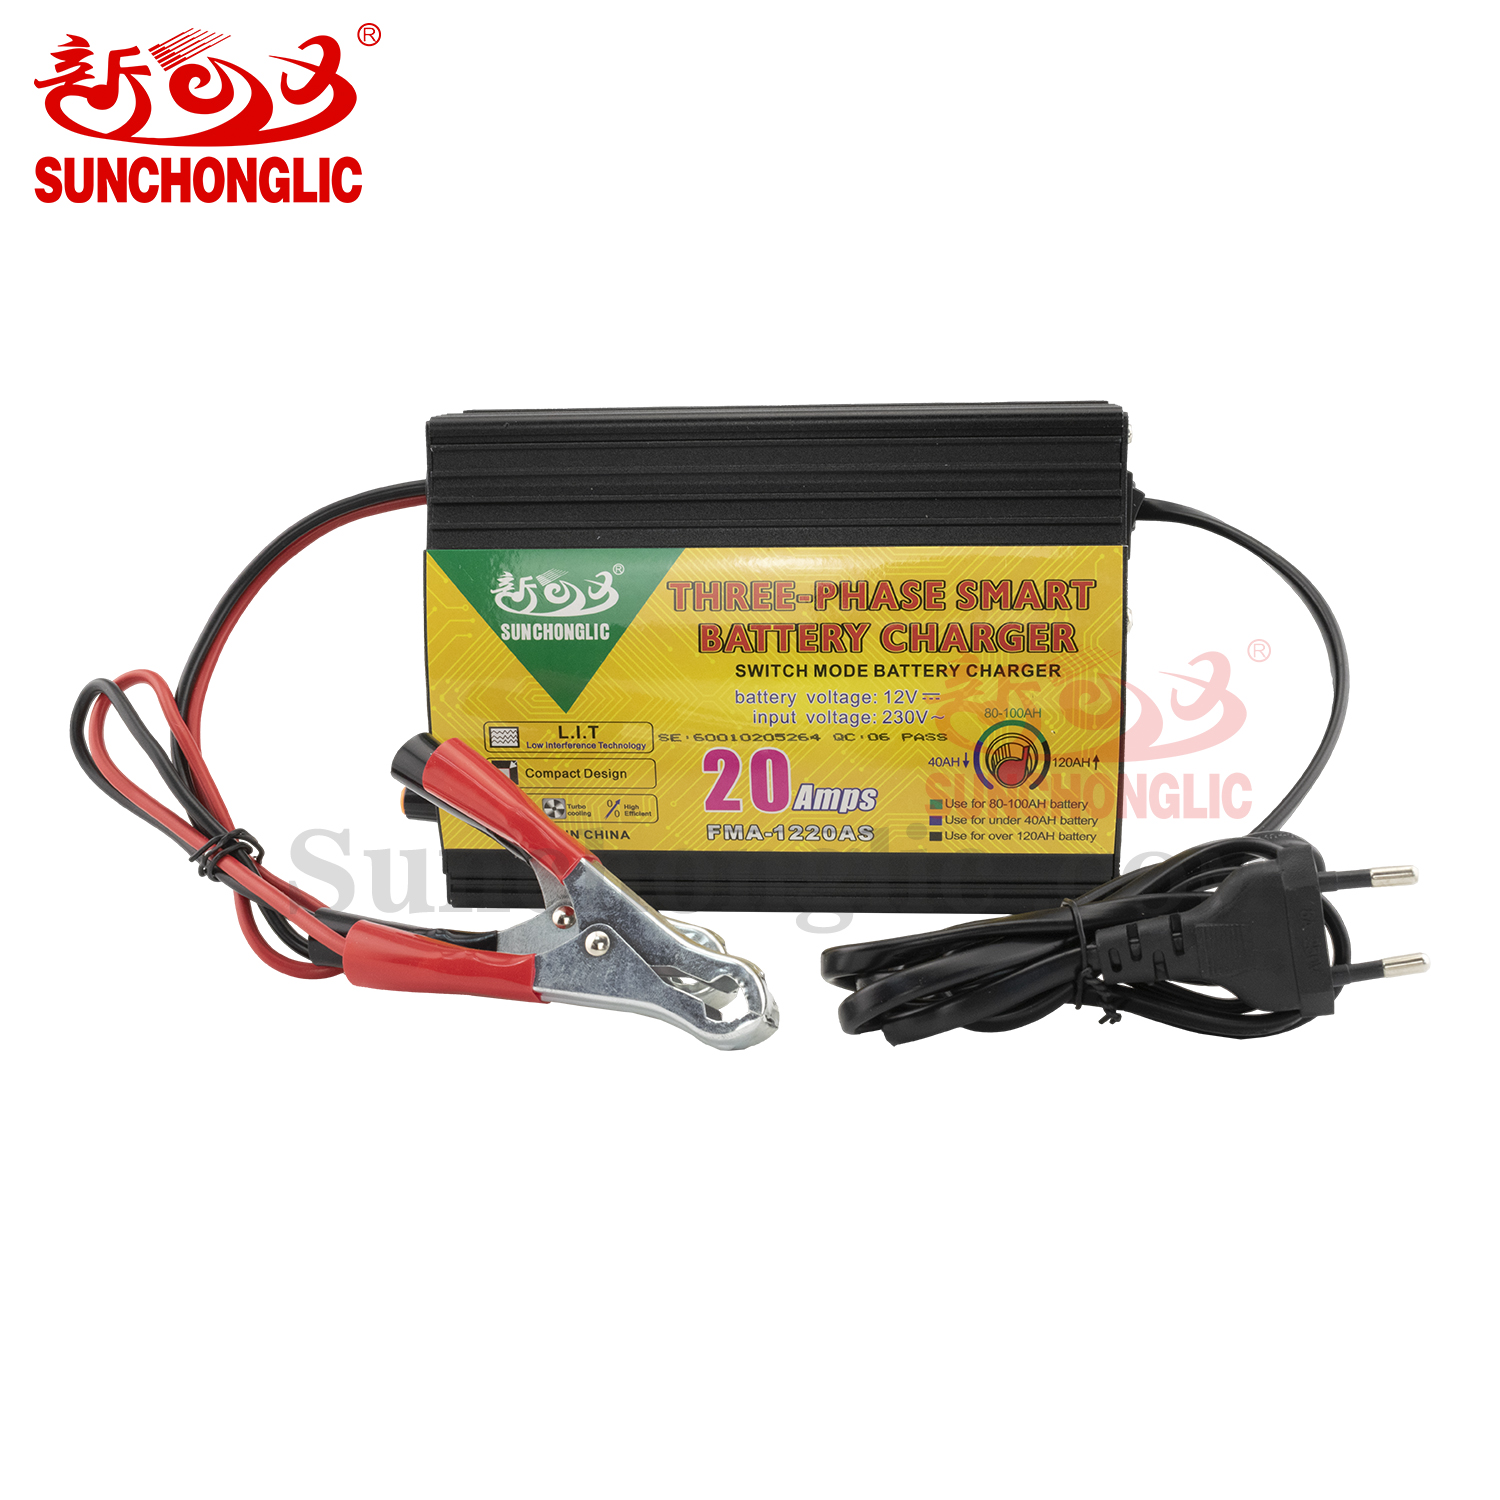 12V 20A battery charger for AGM GEL lead acid battery